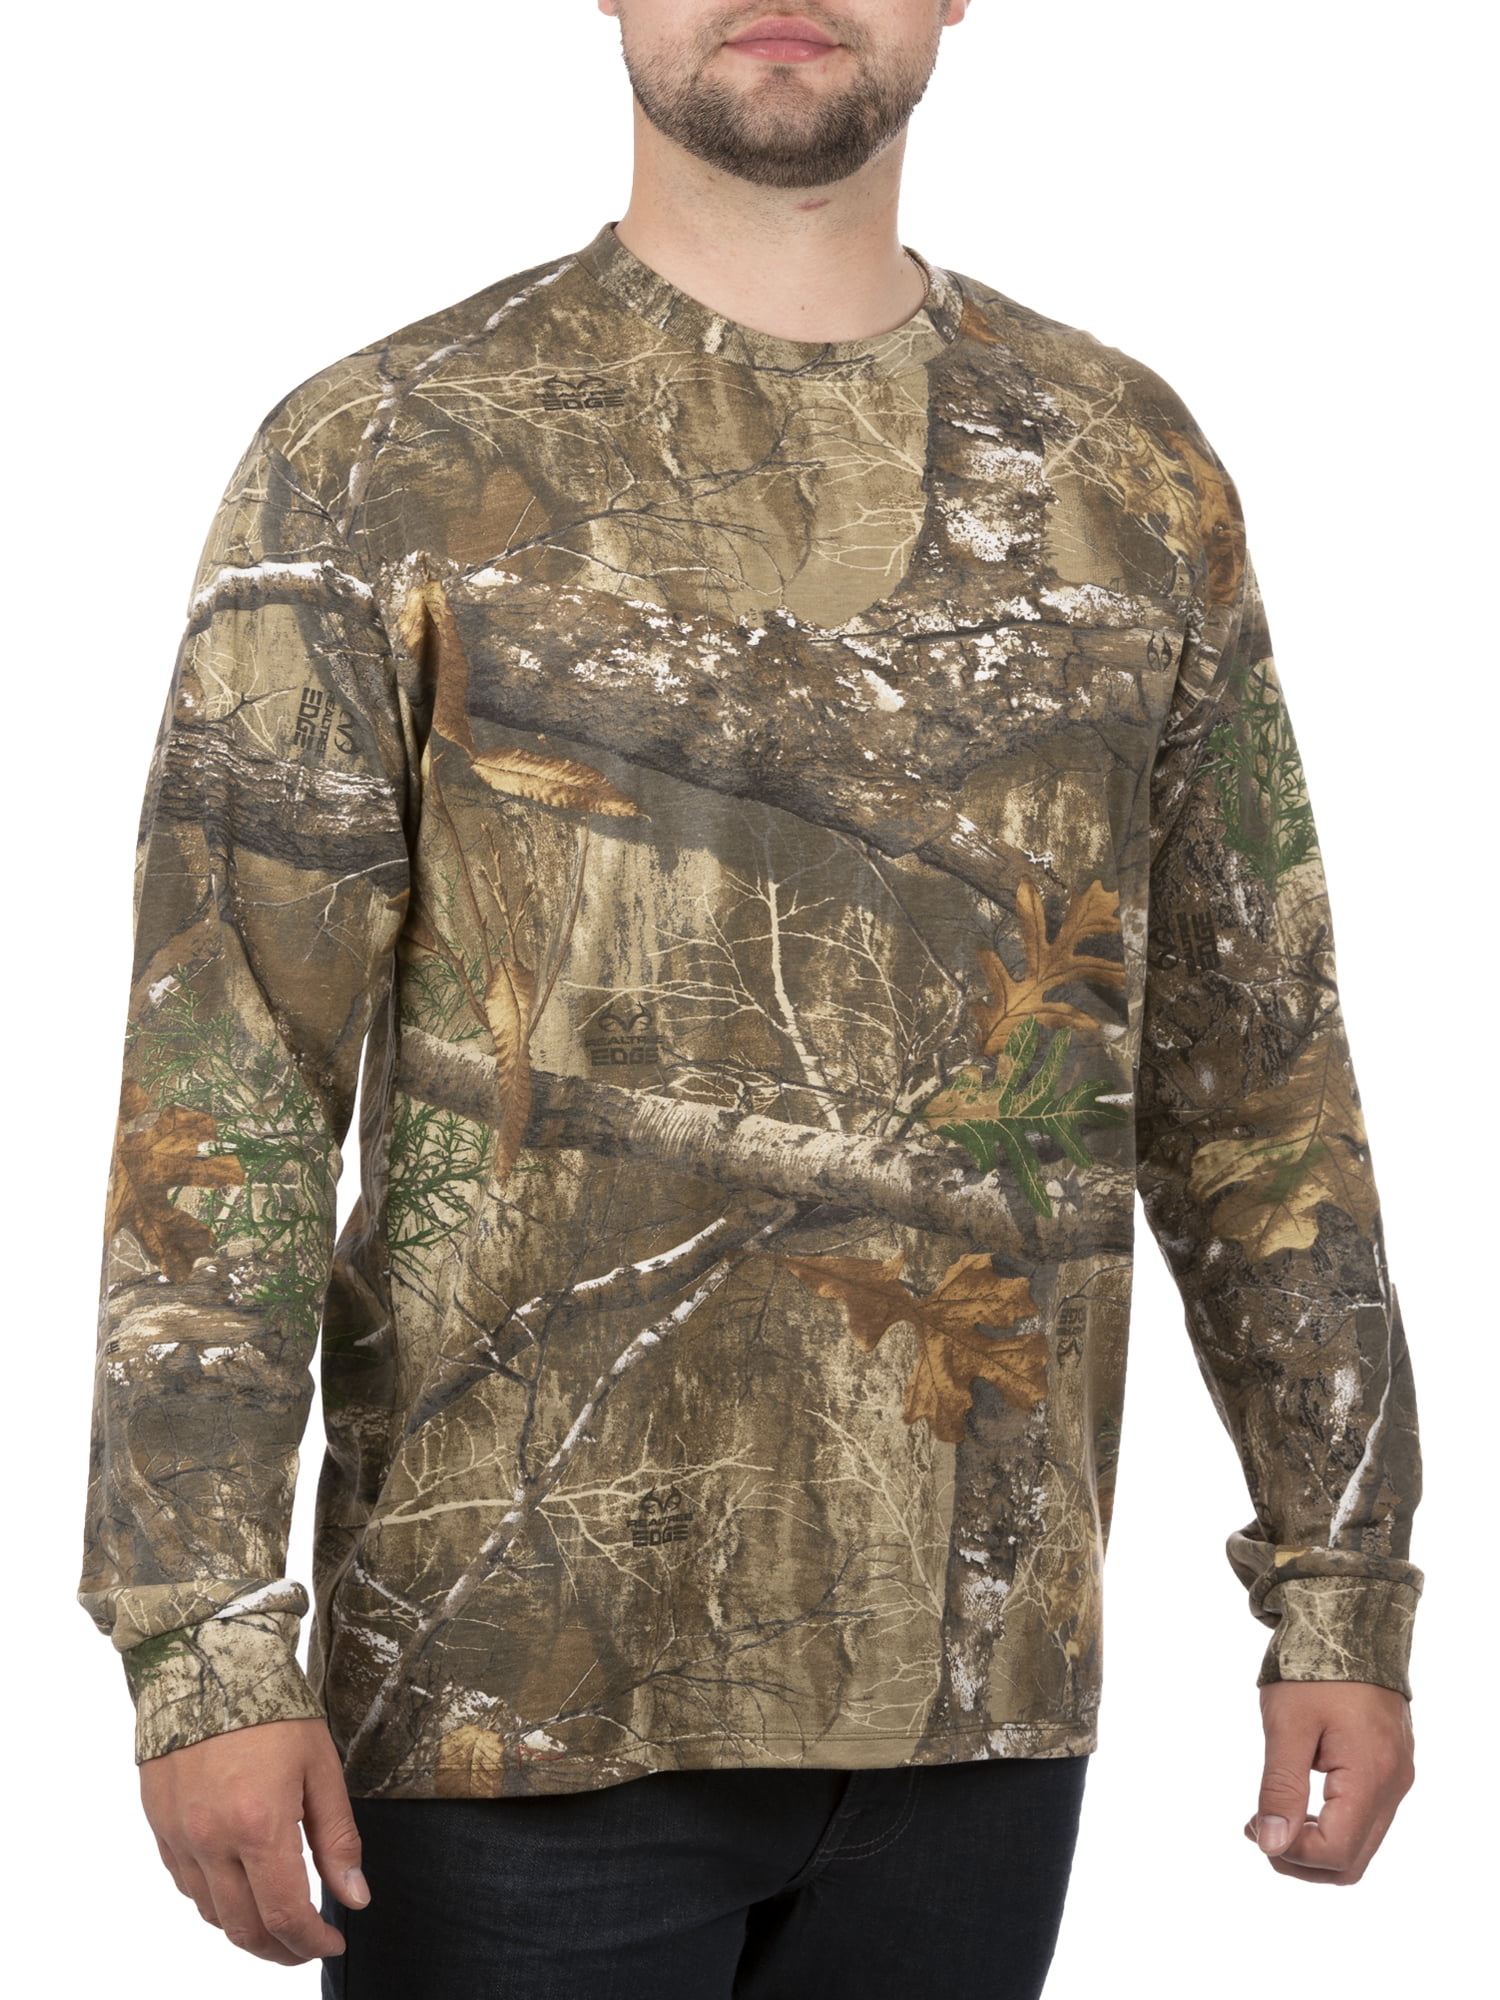 Russell Outdoors REALTREE All Purpose Camo LONG SLEEVE T-shirt S-2XL 3XL HUNTING 